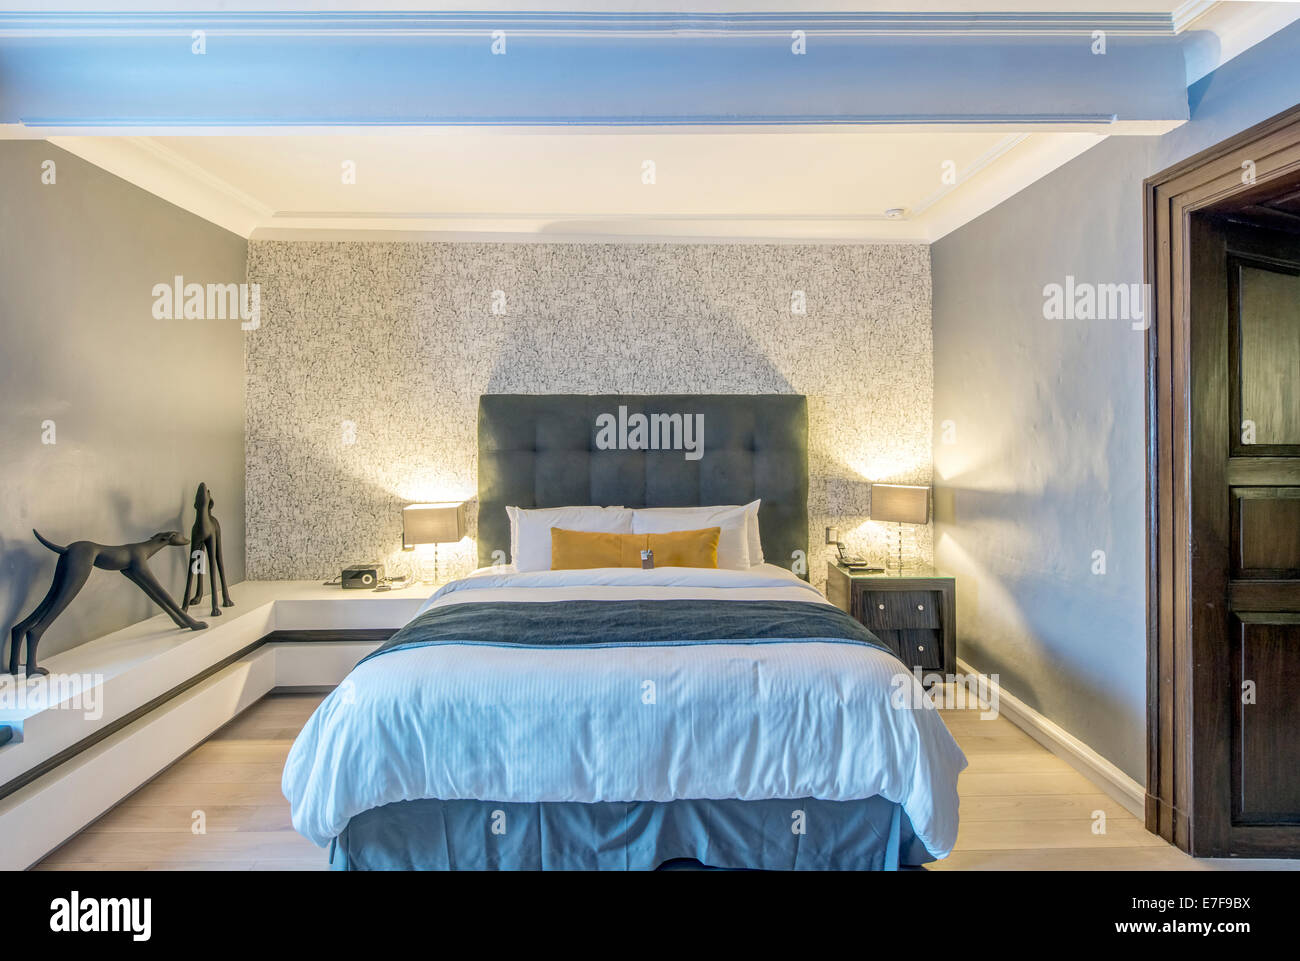 Bed, lighting and art in modern hotel room Stock Photo